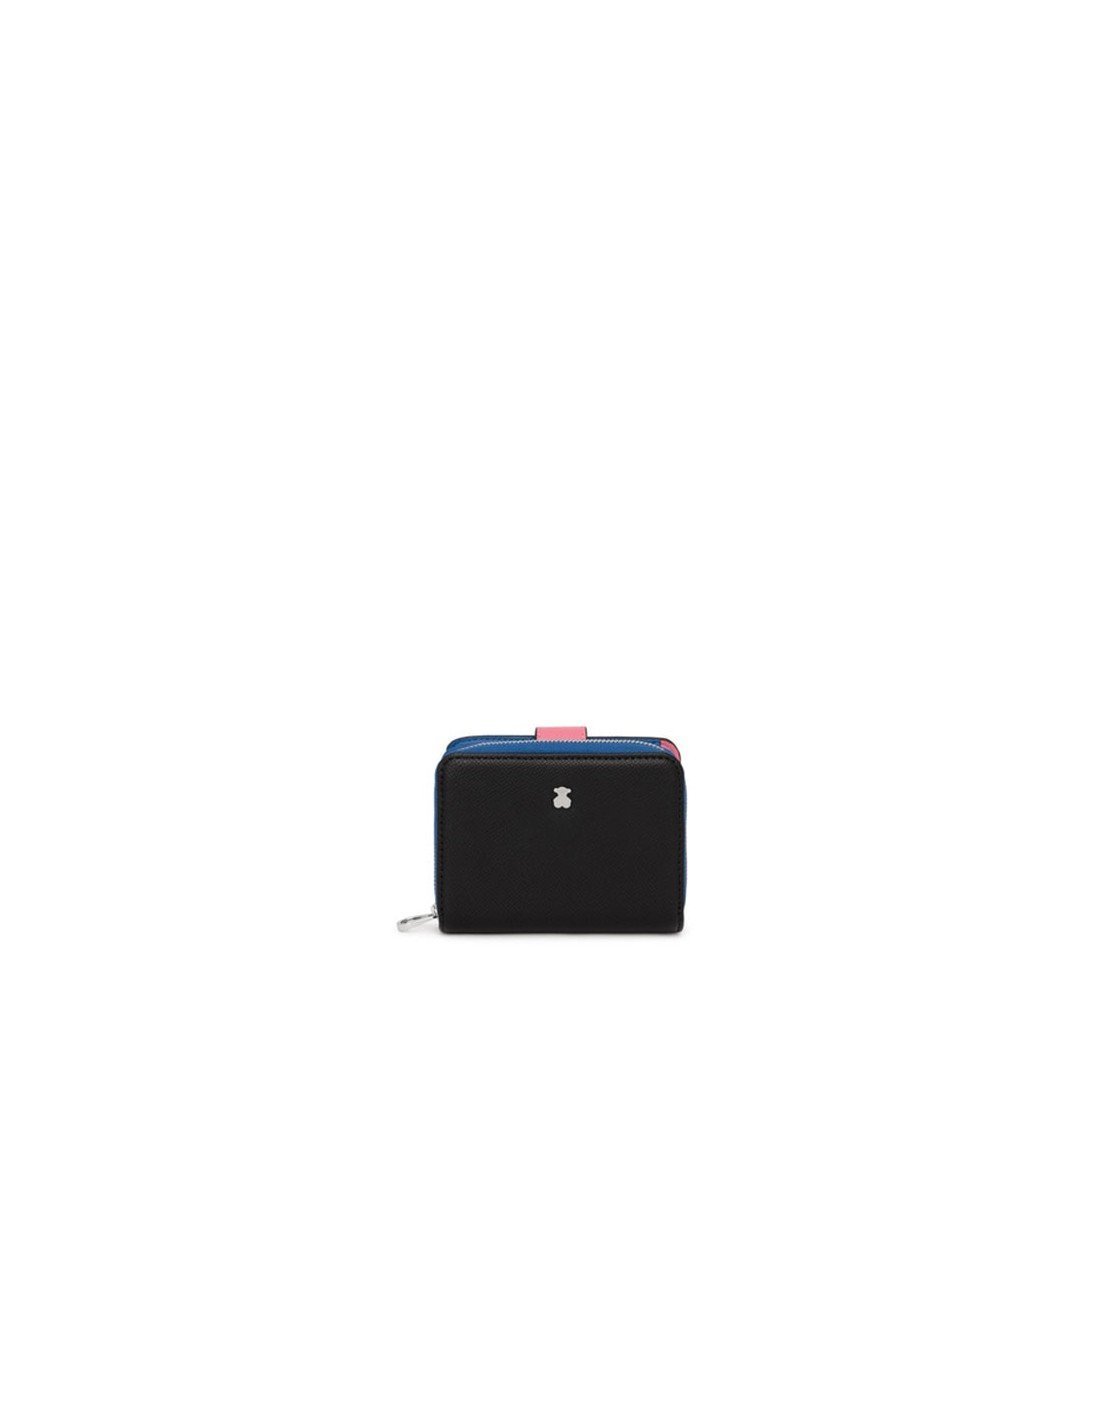 Tous Small Black And Blue New Dubai Wallet, latest offers on Tous Moda  fashion accessories